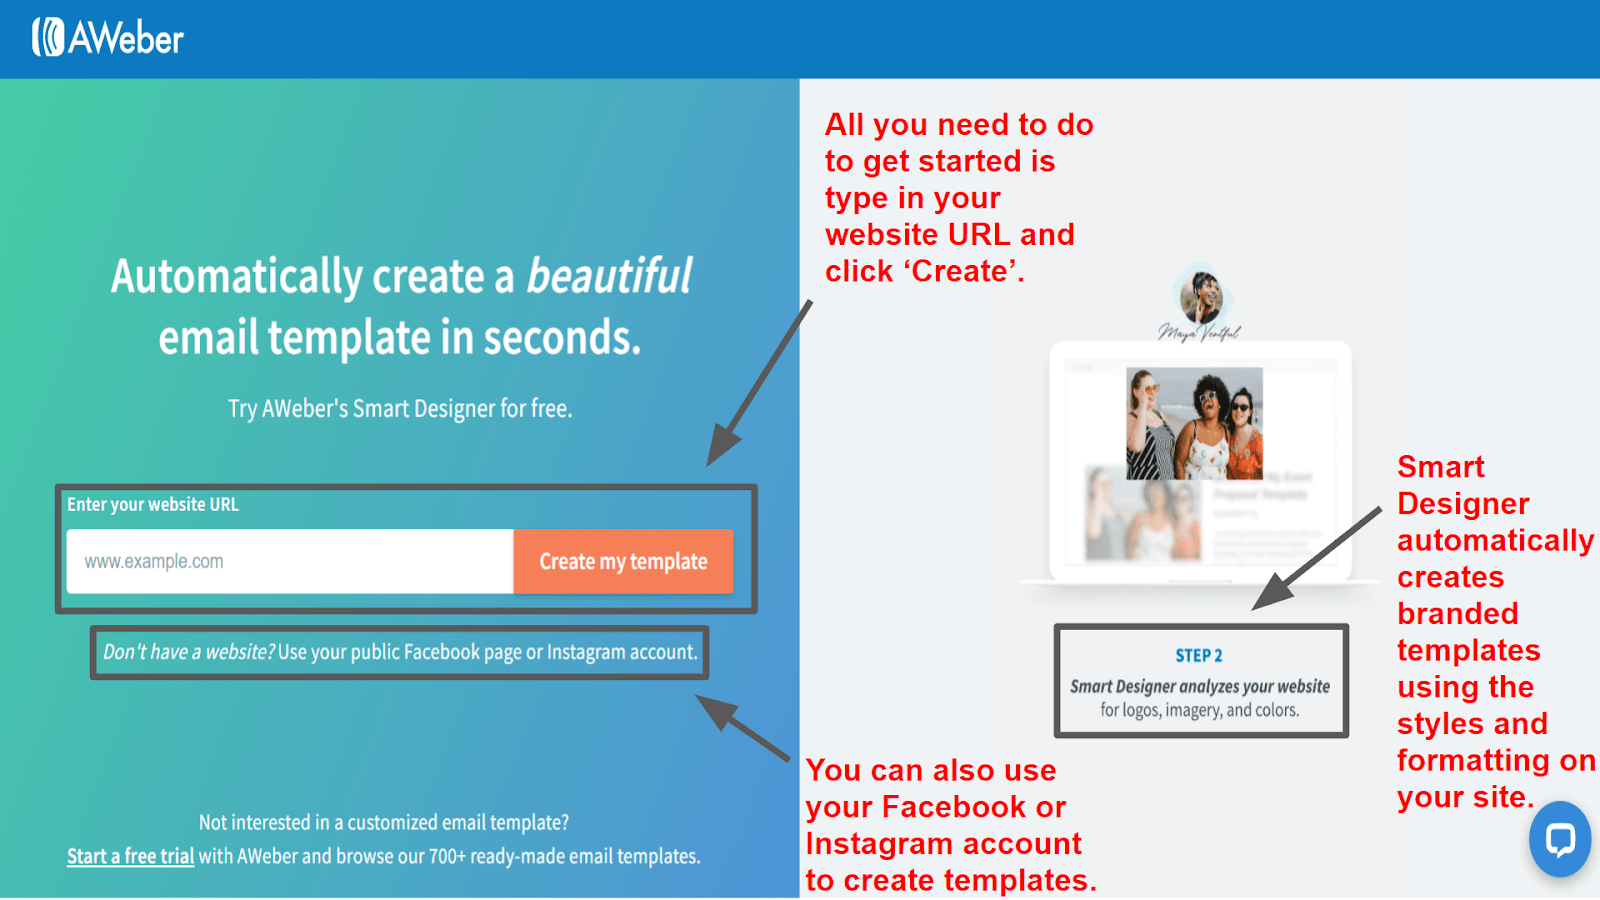 The AWeber Smart Designer for creating customized templates.